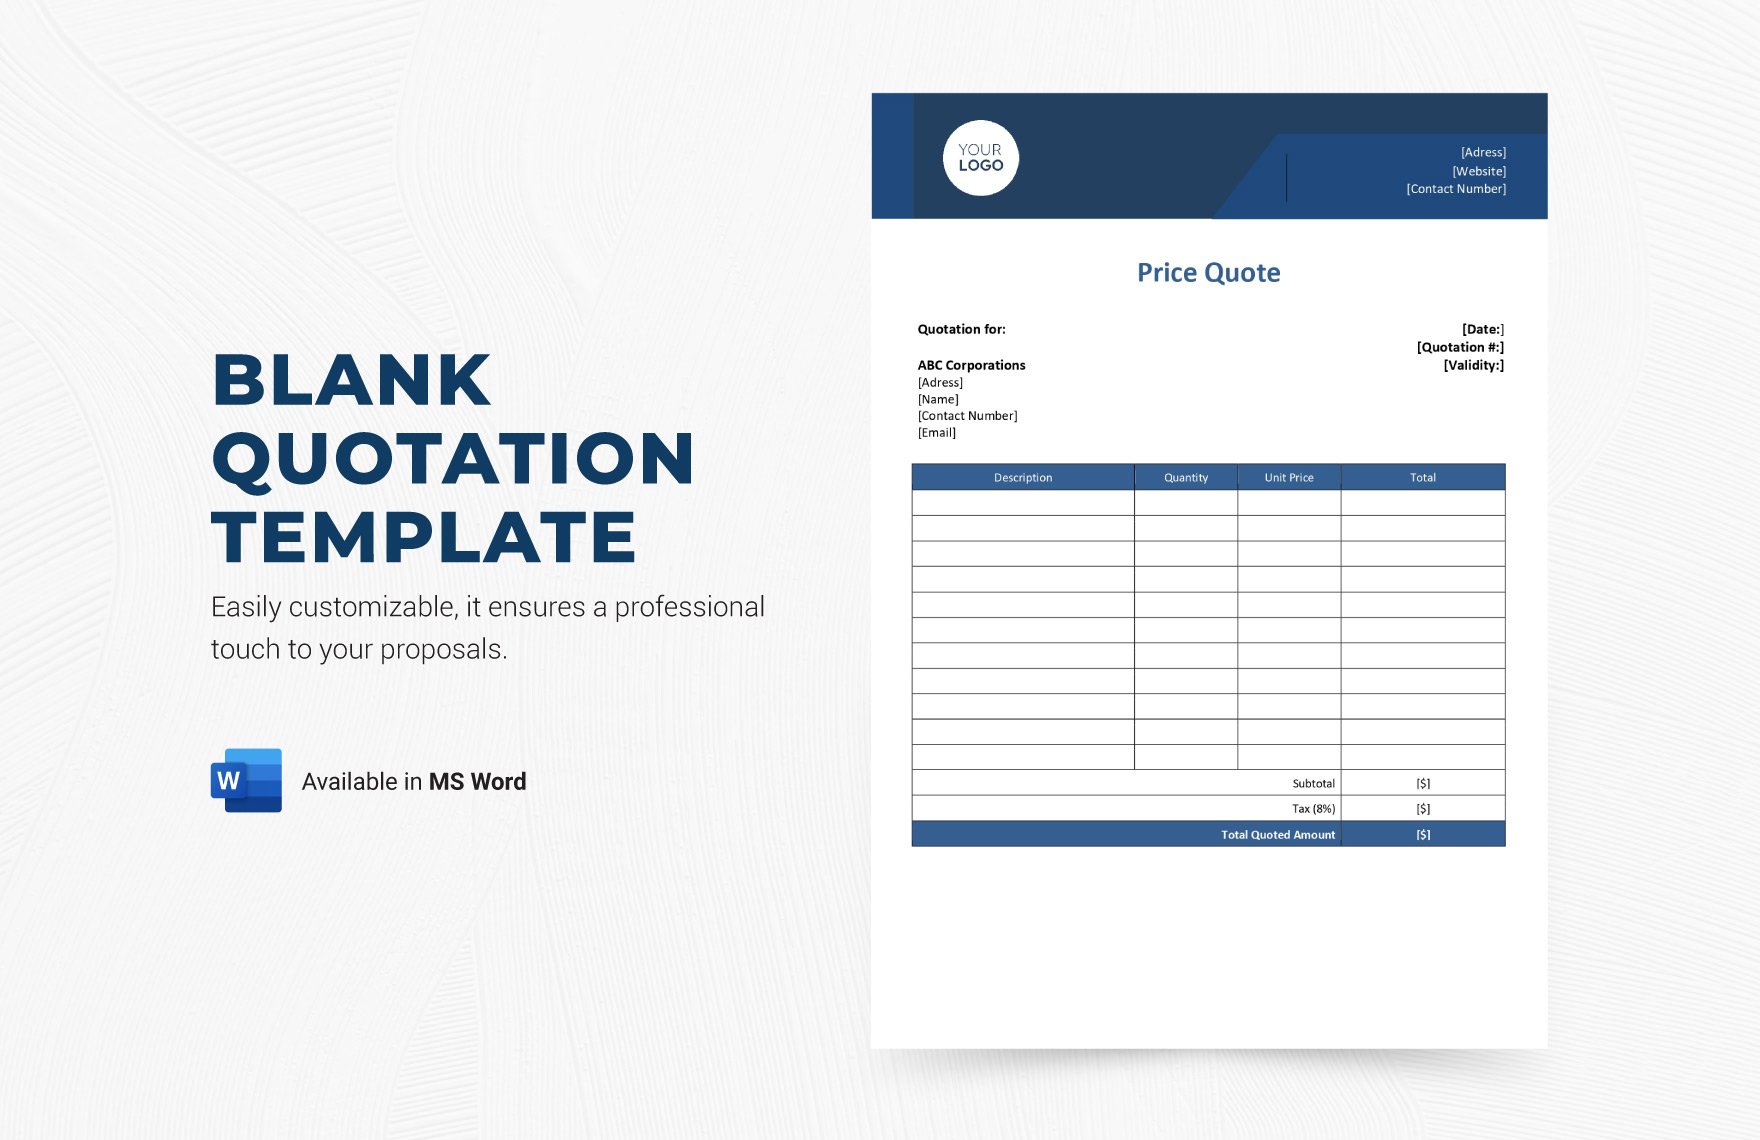 Blank Quotation Form Template